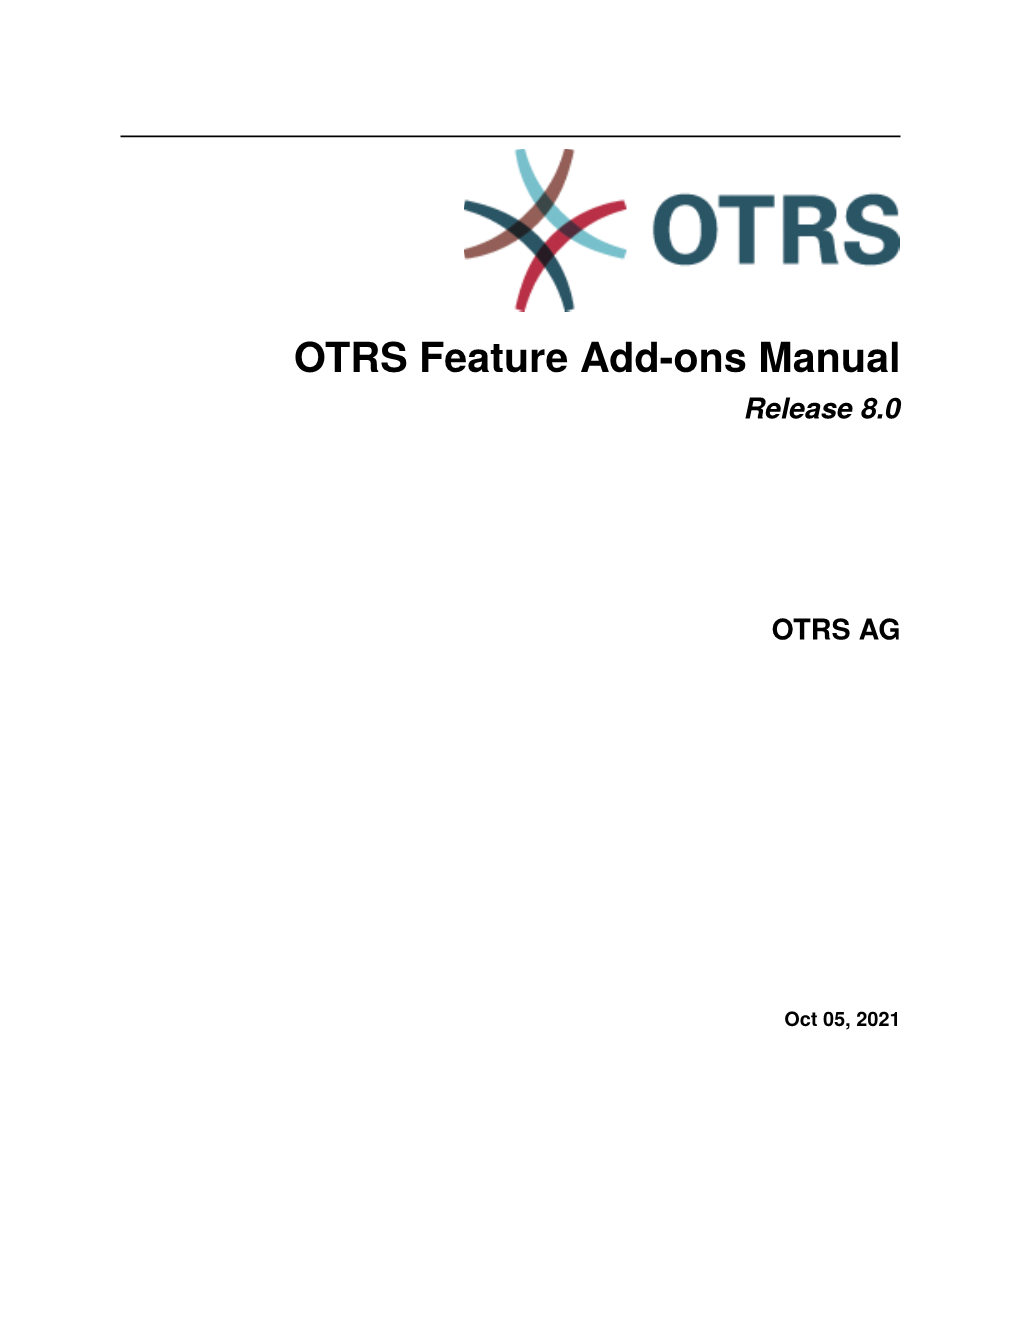 OTRS Feature Add-Ons Manual Release 8.0